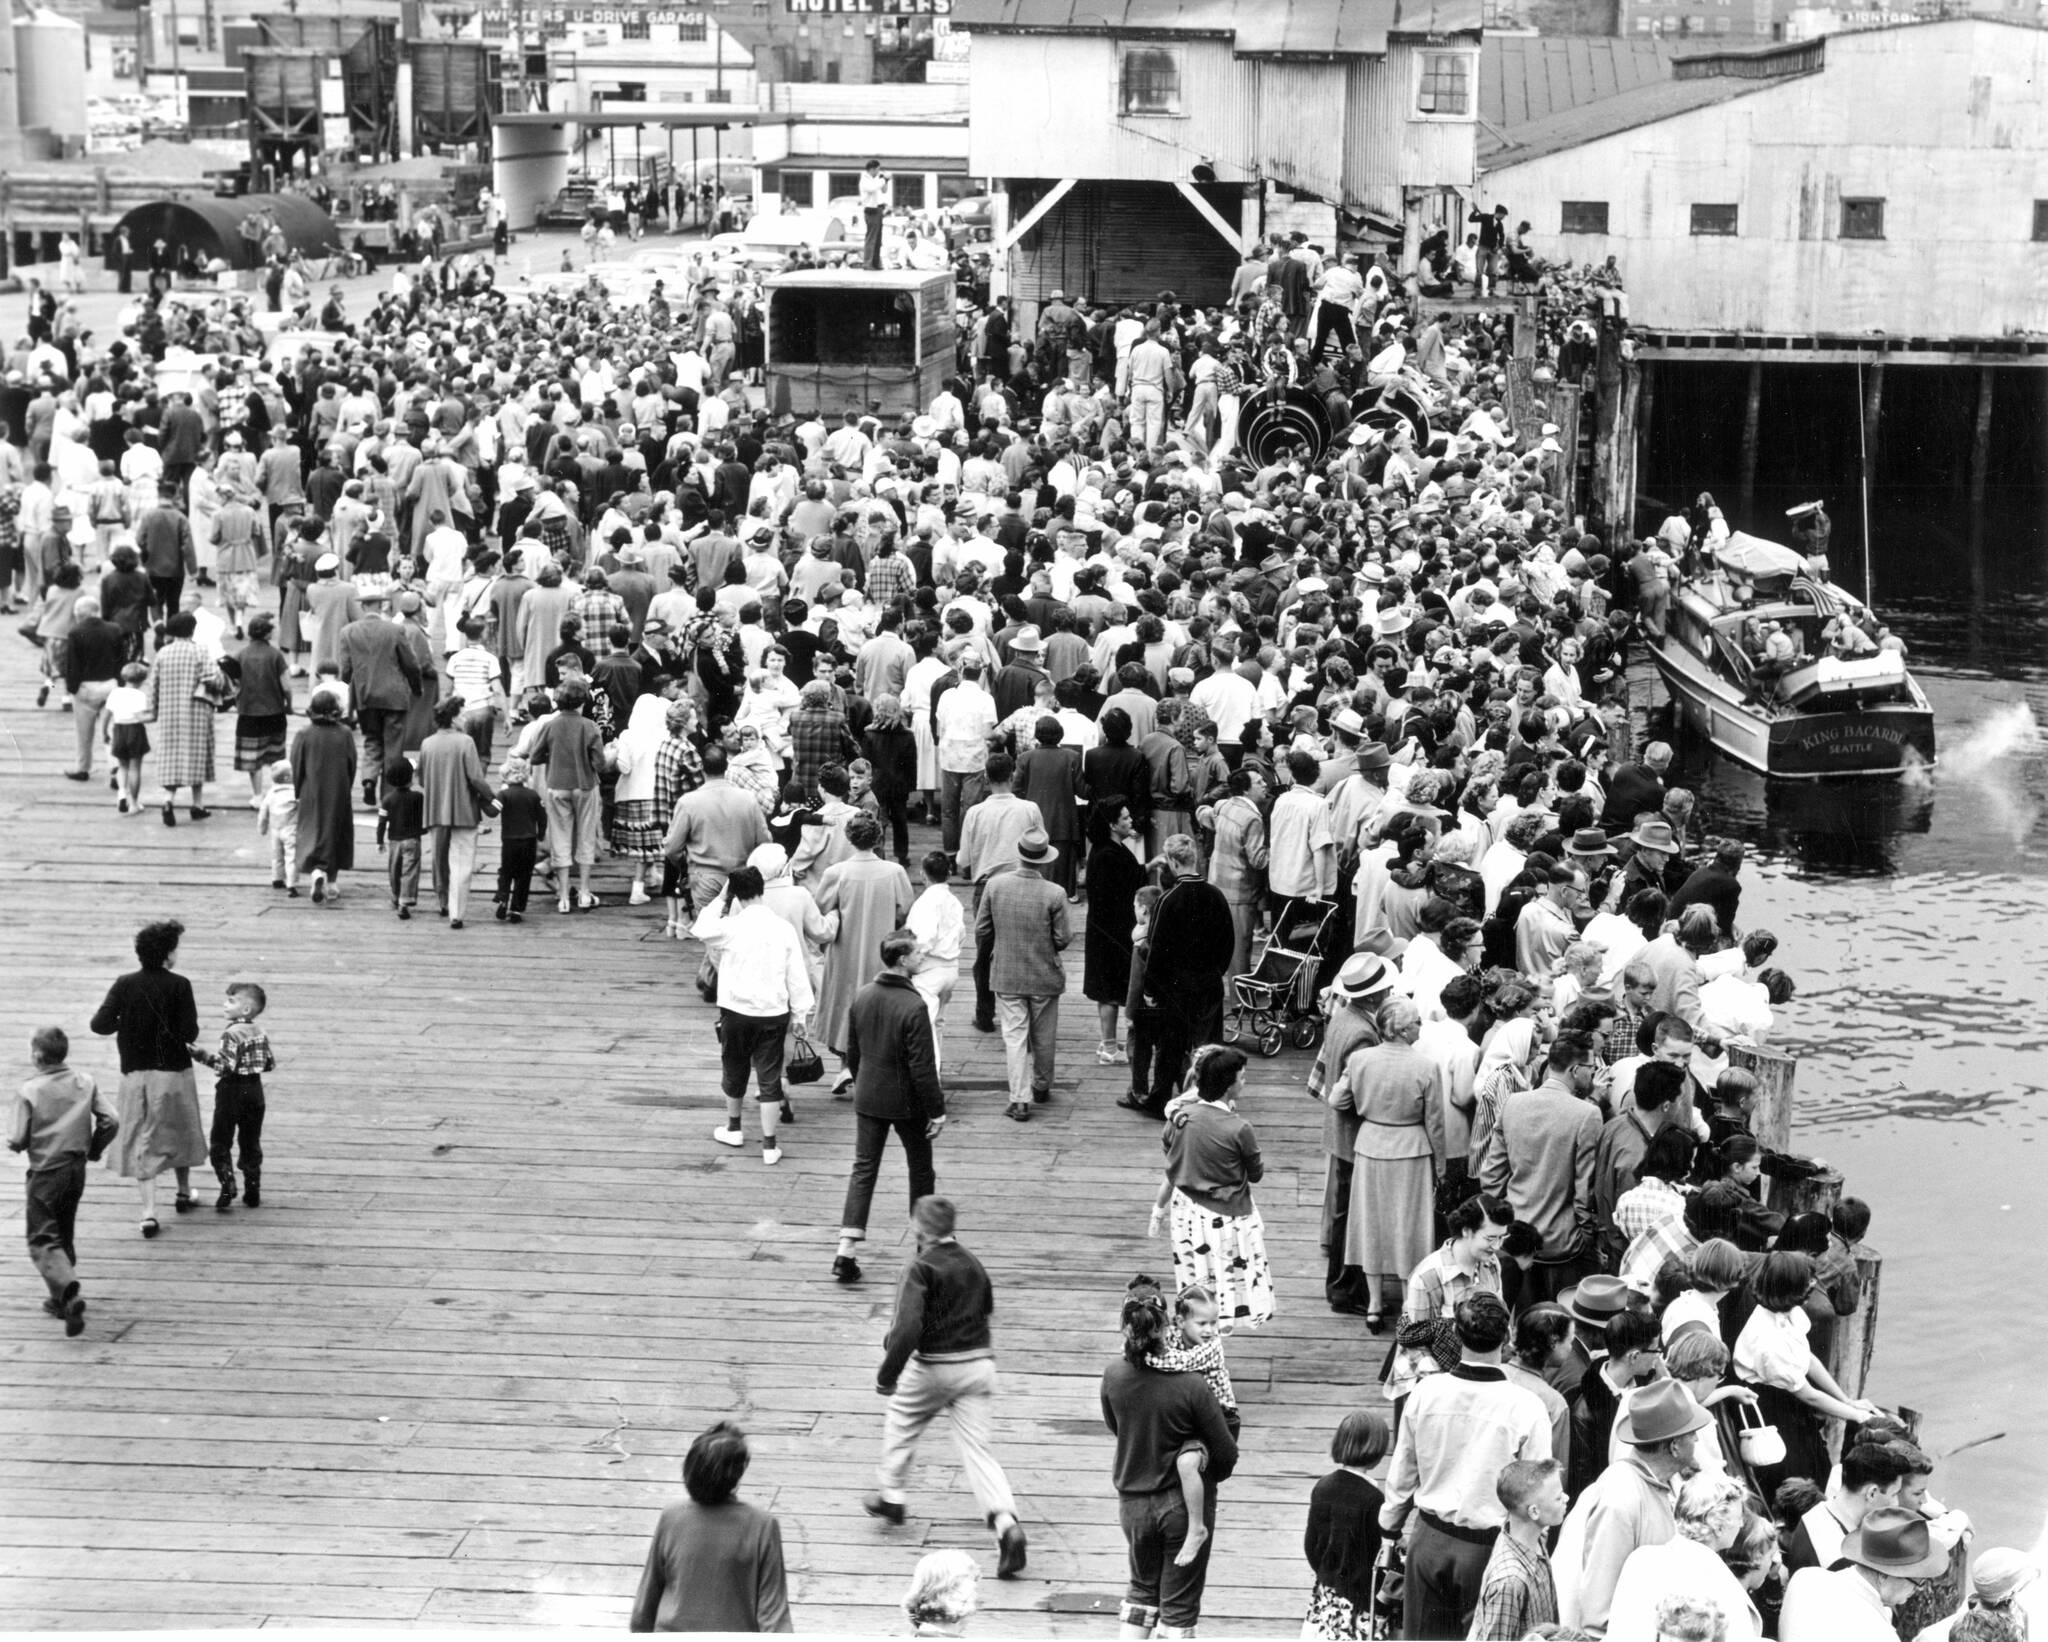 A large crowd greets long-distance swimmer Bert Thomas upon his return to Port Angeles. (Courtesy of North Olympic History Center)